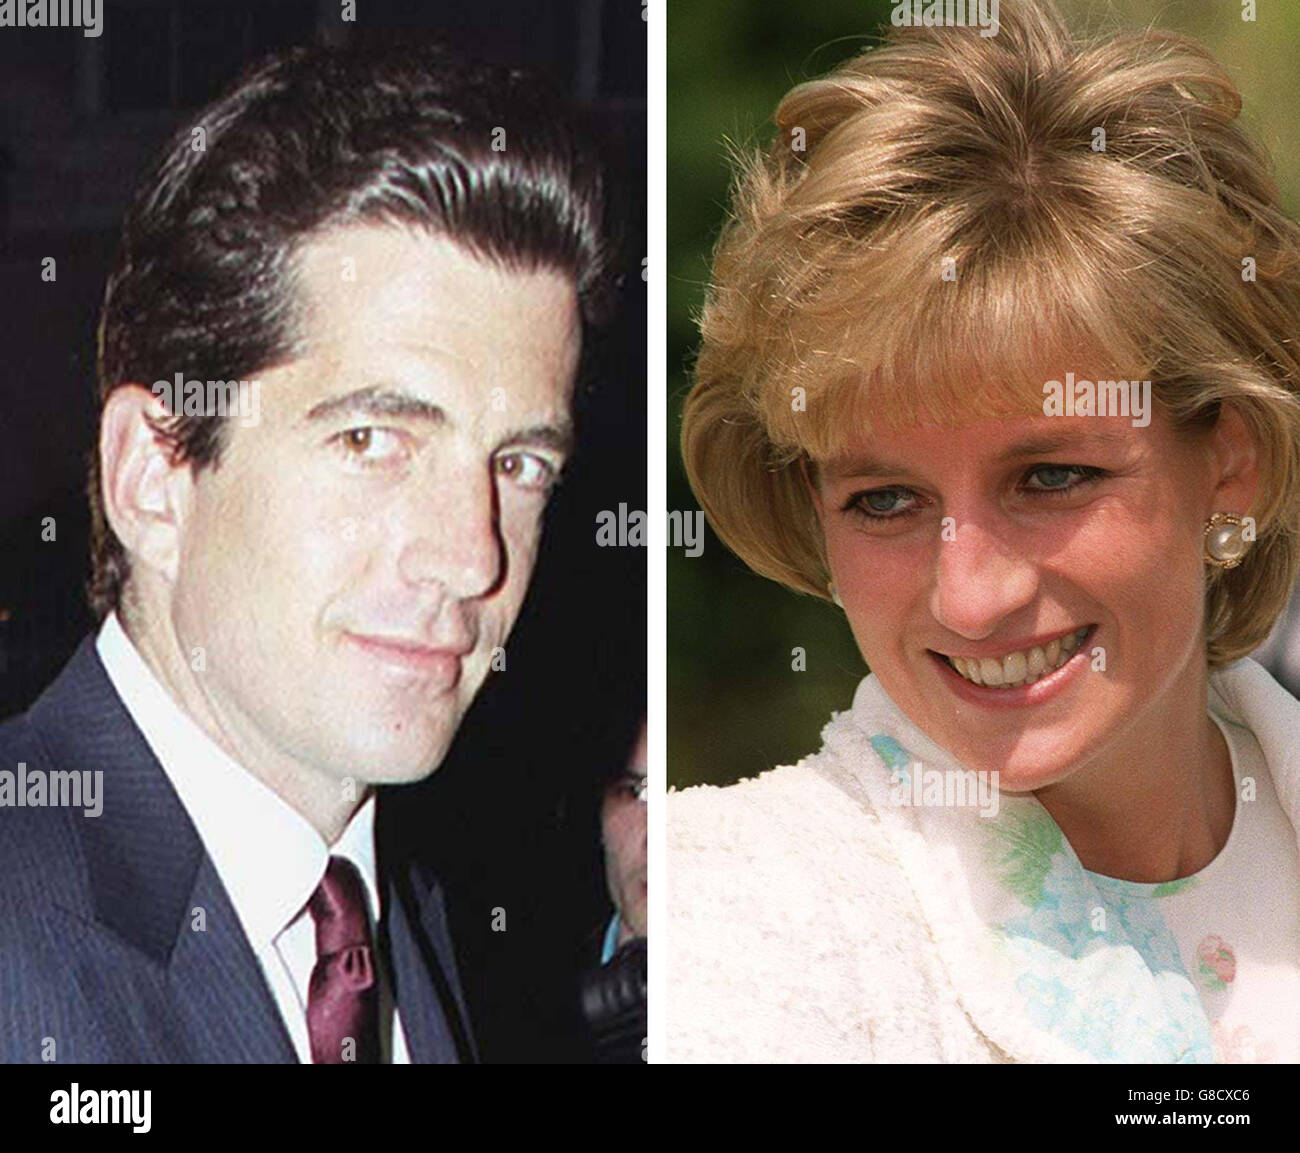 John Kennedy Jr and Diana, Princess of Wales. Princess Diana had a passionate one-night stand with John F Kennedy Jnr,according to a new book. The pair had a steamy fling, which Diana described as 'pure chemistry,' according to a new book by friend and confidante Simone Simmons. She rated Kennedy 'ten out of ten' in bed, and said their session in a New York hotel was 'pure lust,' Simmons claims. The author, whose book 'Diana: the Last Word' is serialised in the Sun, said the princess fantasised about becoming America's First Lady. Stock Photo